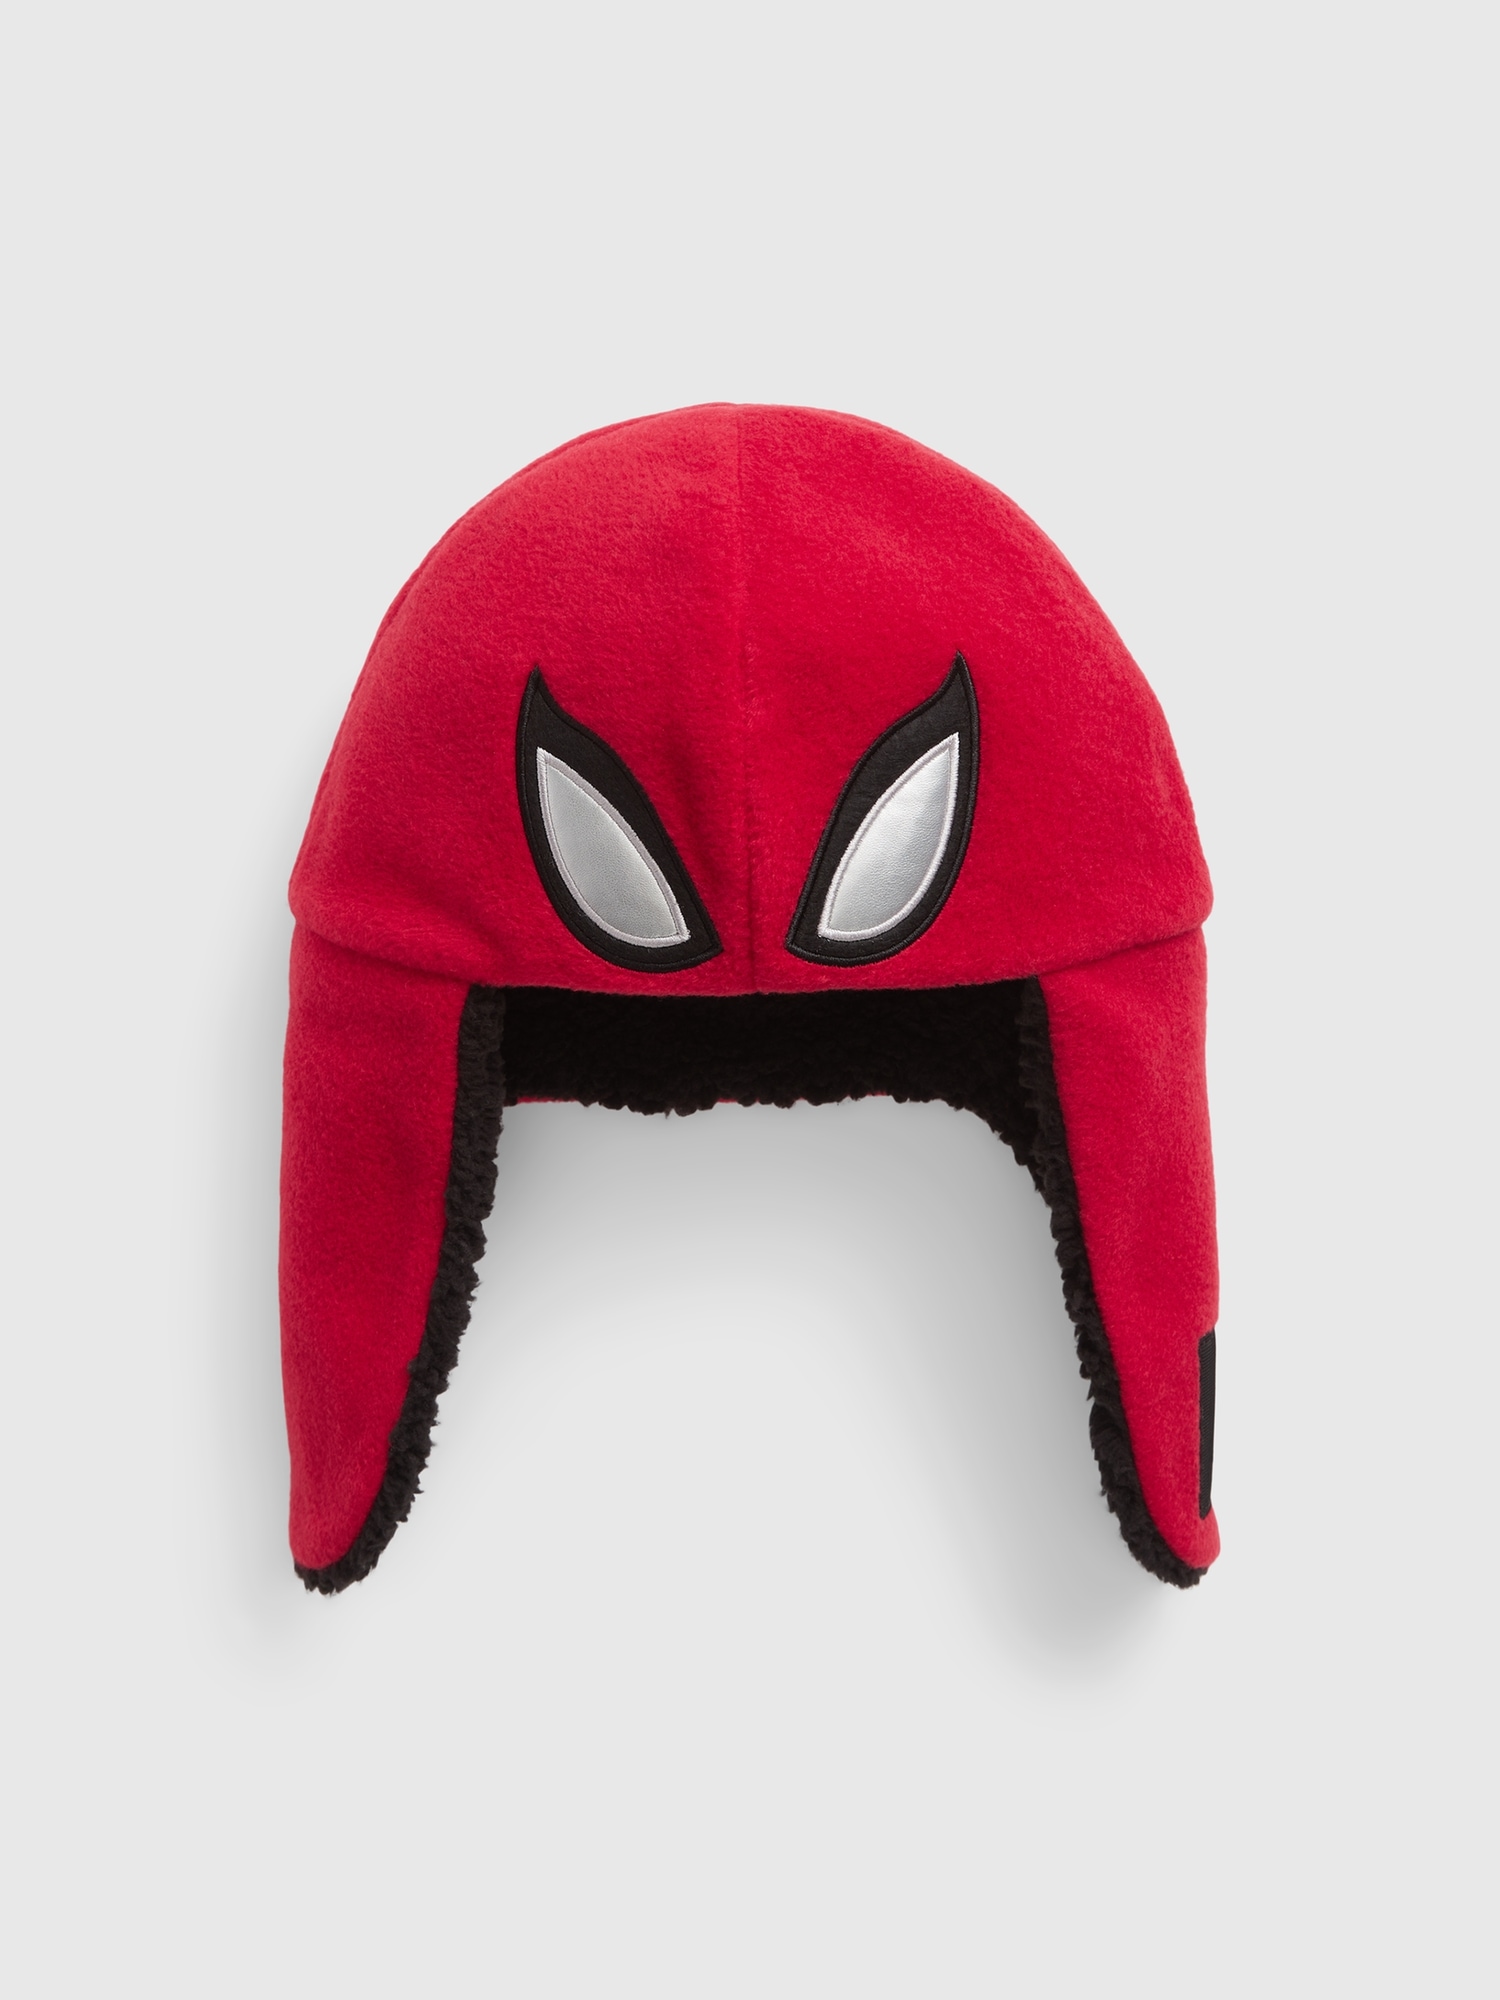 Gap Toddler & Baby Beanies: Marvel Spiderman Trapper Hat $3.18 & More + Free S/H $50+